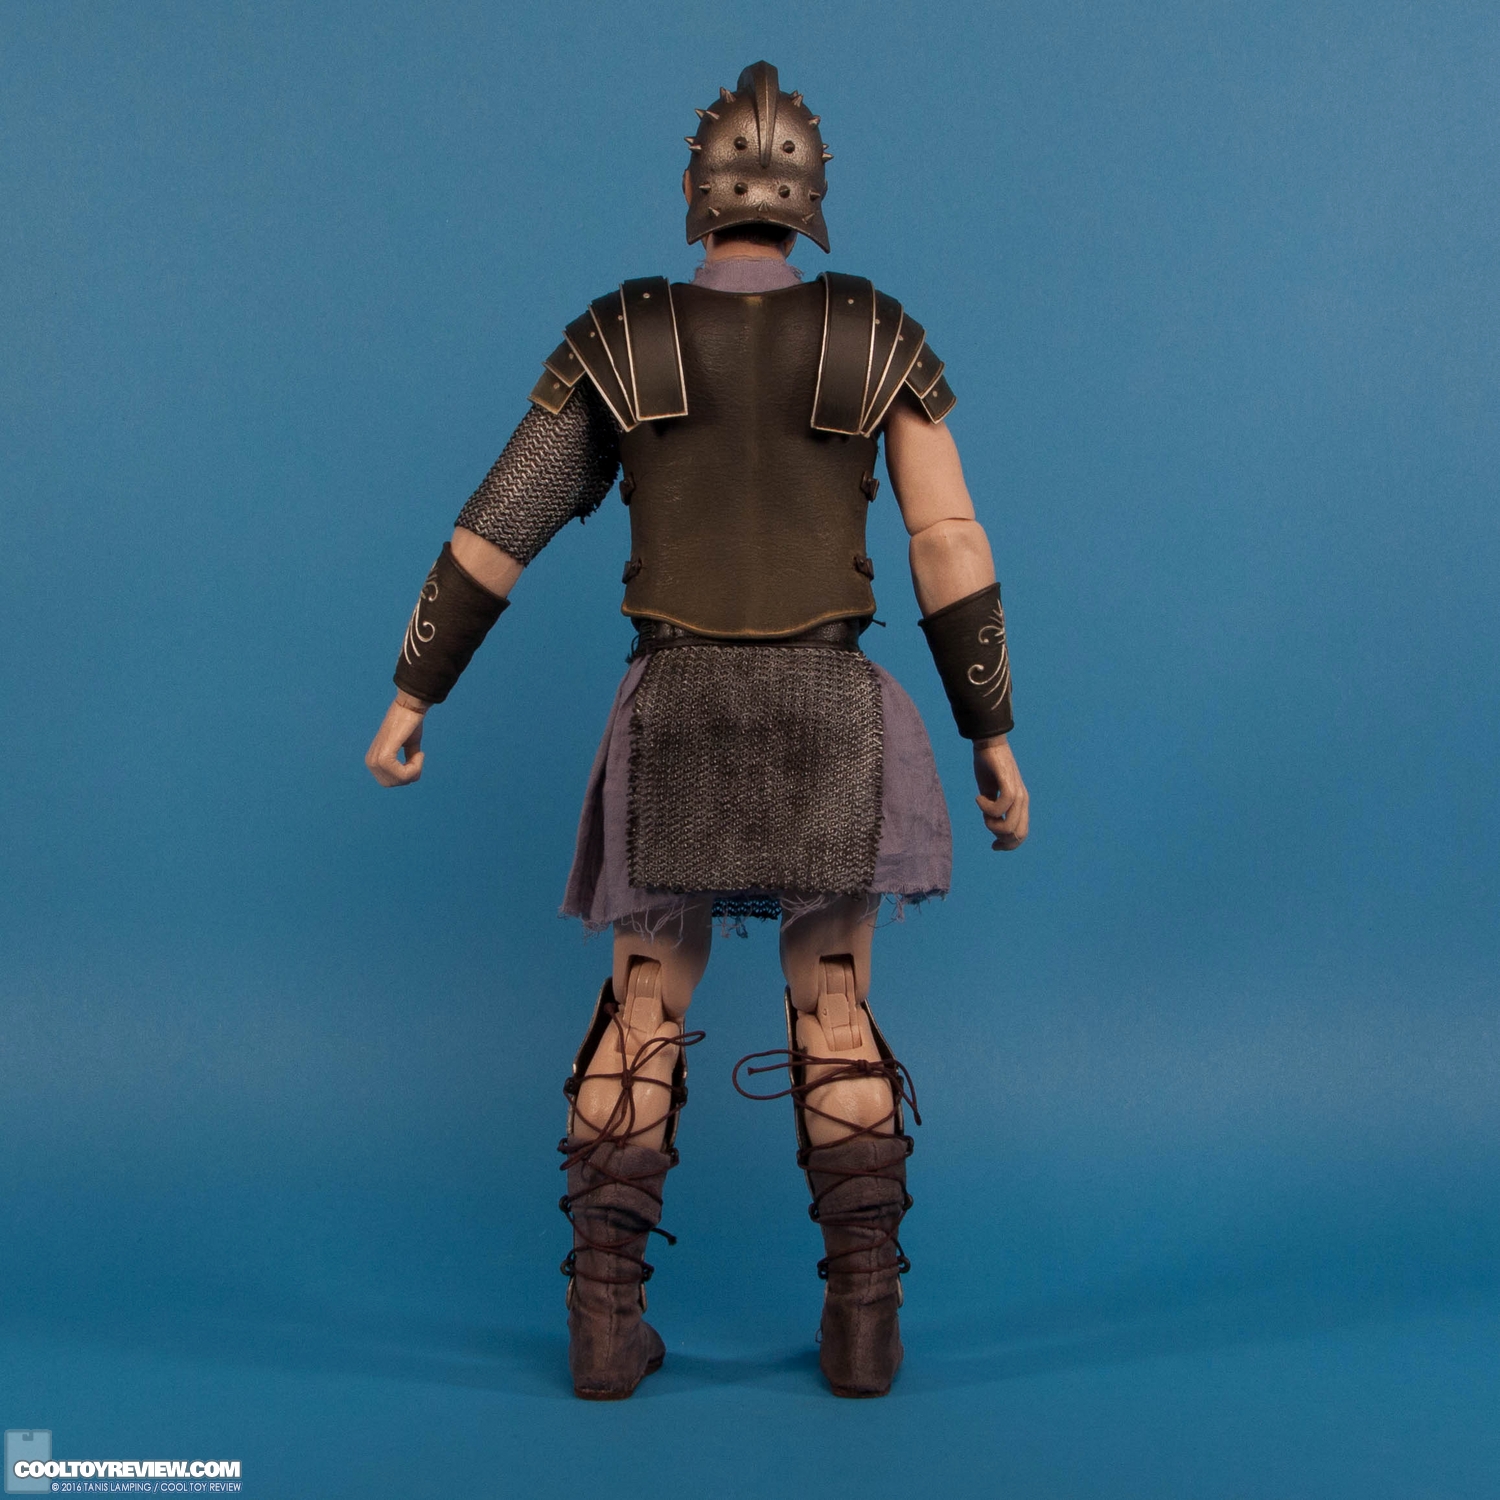 pangaea-toy-gladiator-general-sixth-scale-collectible-figure-012.jpg